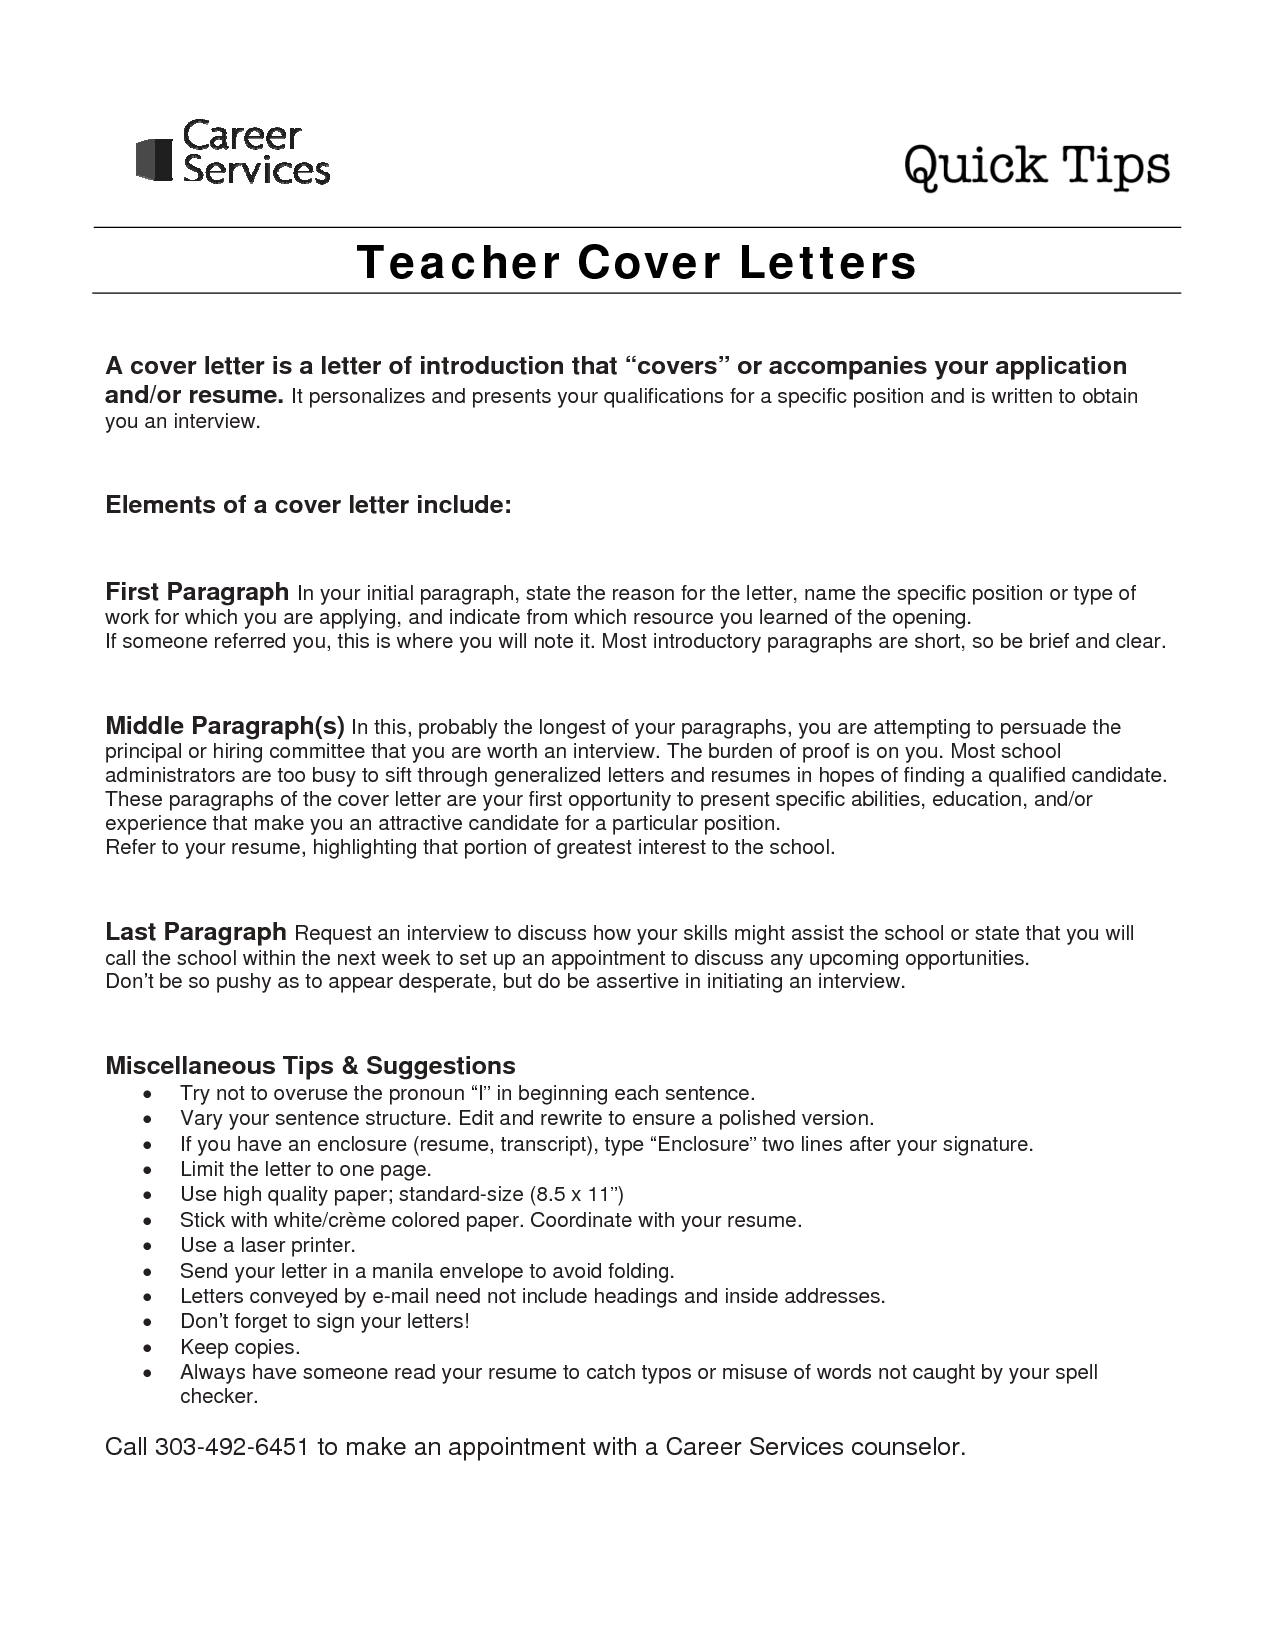 Sample Cover Letter For Teaching Job With No Experience throughout measurements 1275 X 1650